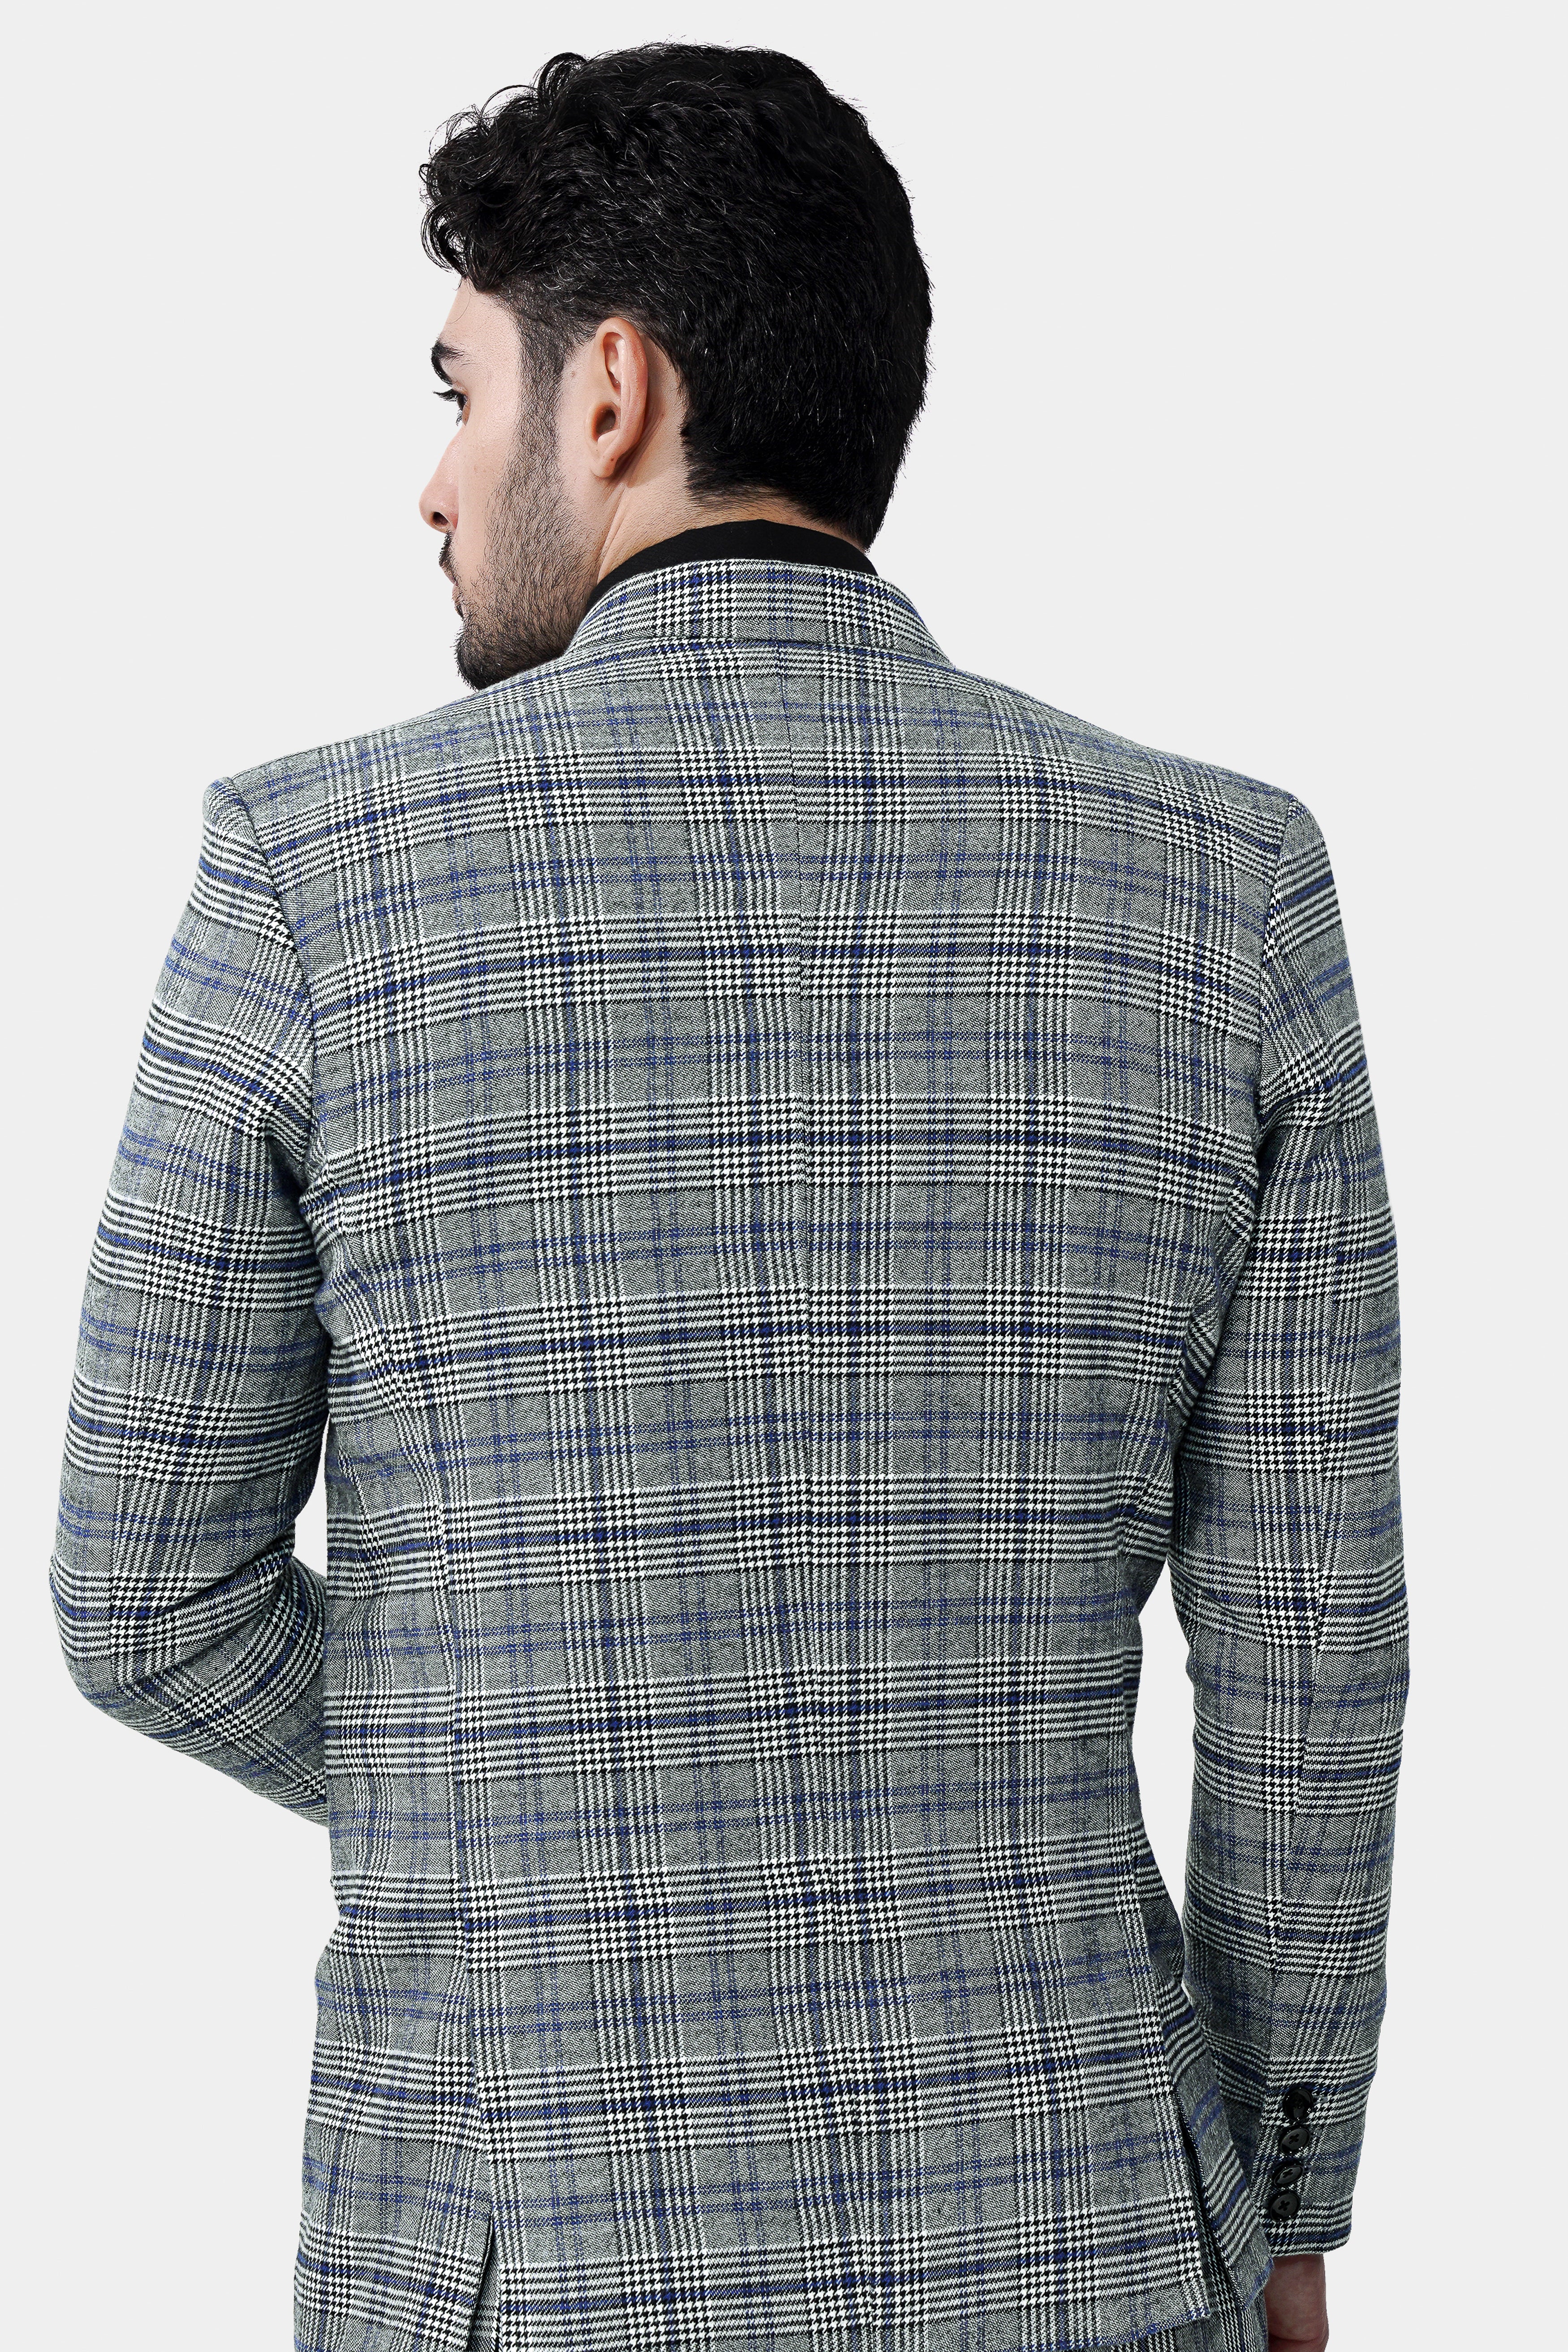 Chalice Gray and Chathams Blue Plaid Houndstooth Tweed Double-Breasted Blazer BL3027-DB-36, BL3027-DB-38, BL3027-DB-40, BL3027-DB-42, BL3027-DB-44, BL3027-DB-46, BL3027-DB-48, BL3027-DB-50, BL3027-DB-52, BL3027-DB-54, BL3027-DB-56, BL3027-DB-58, BL3027-DB-60